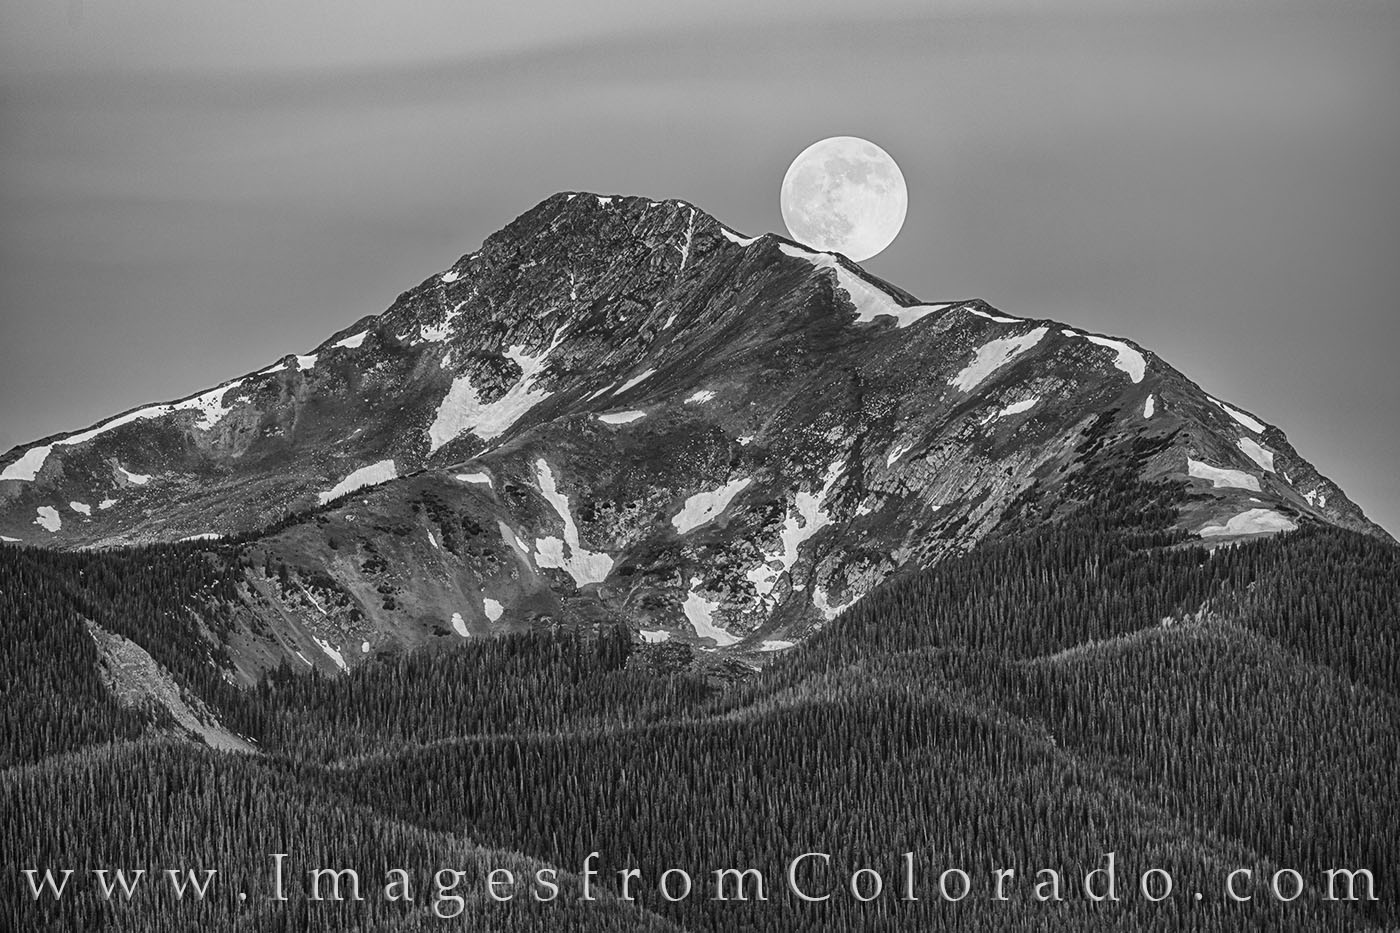 The full moon sets behind Byers Peak in Fraser, Colorado. This black and white photograph shows the iconic landmark of the Fraser...